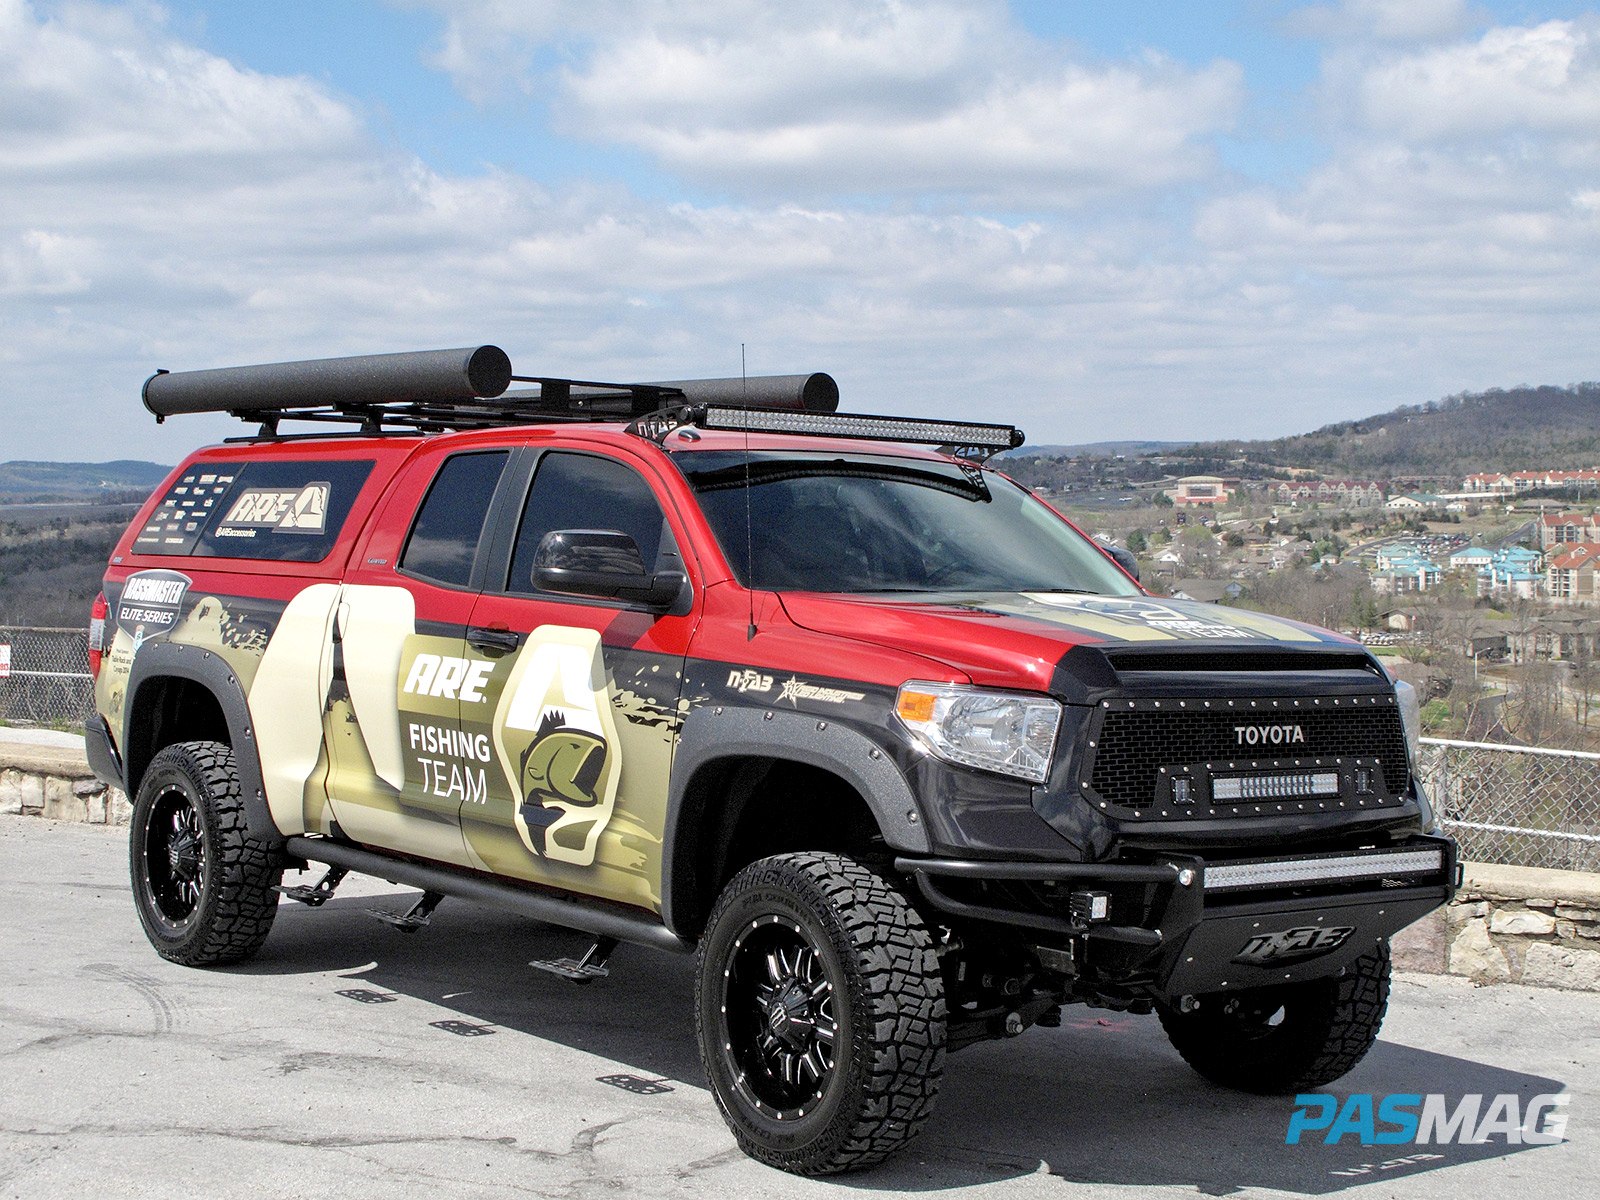 https://www.pasmag.com/images/2015_Trucks_SIP_3rd_Edition/Features/ARE_Tundra/A.R.E.-Fishing-Team-Tundra.jpg